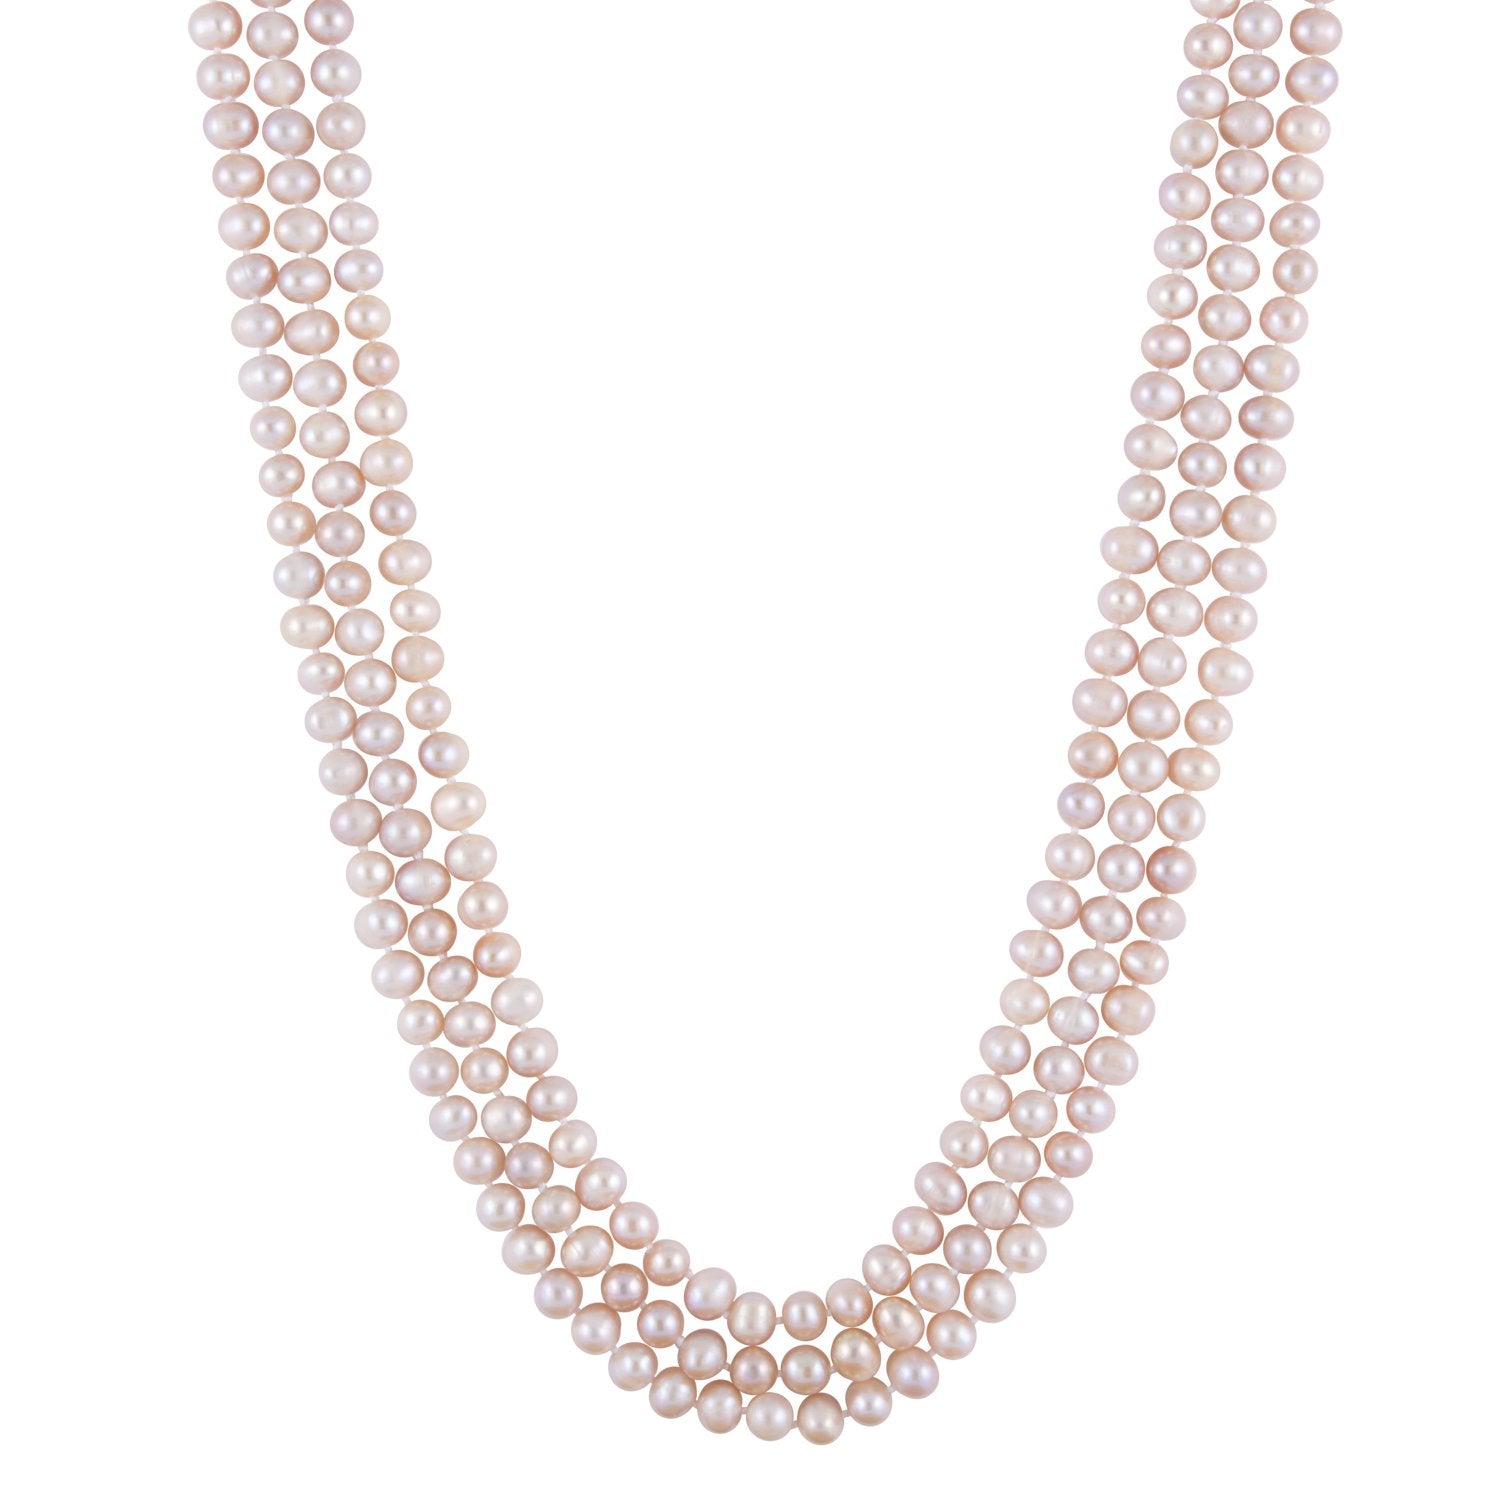 Lovely Pink Endless Pearl Necklace